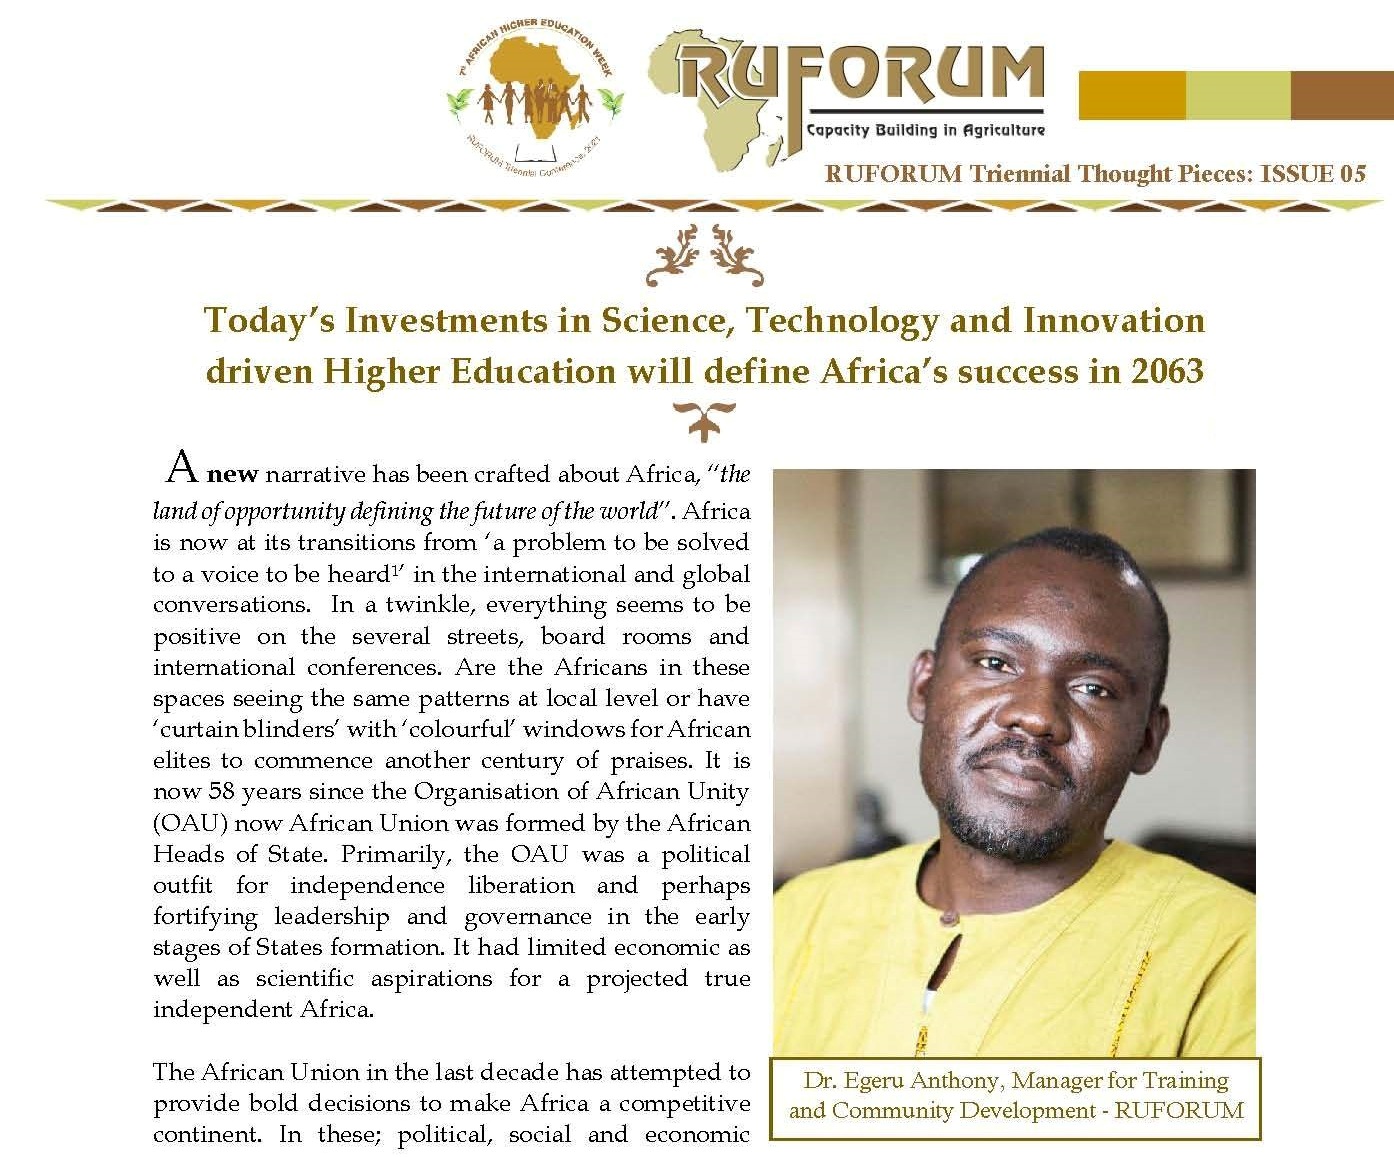 RUFORUM Triennial Thought Pieces: ISSUE 05 by Dr. Egeru Anthony, Manager for Training and Community Development - RUFORUM.